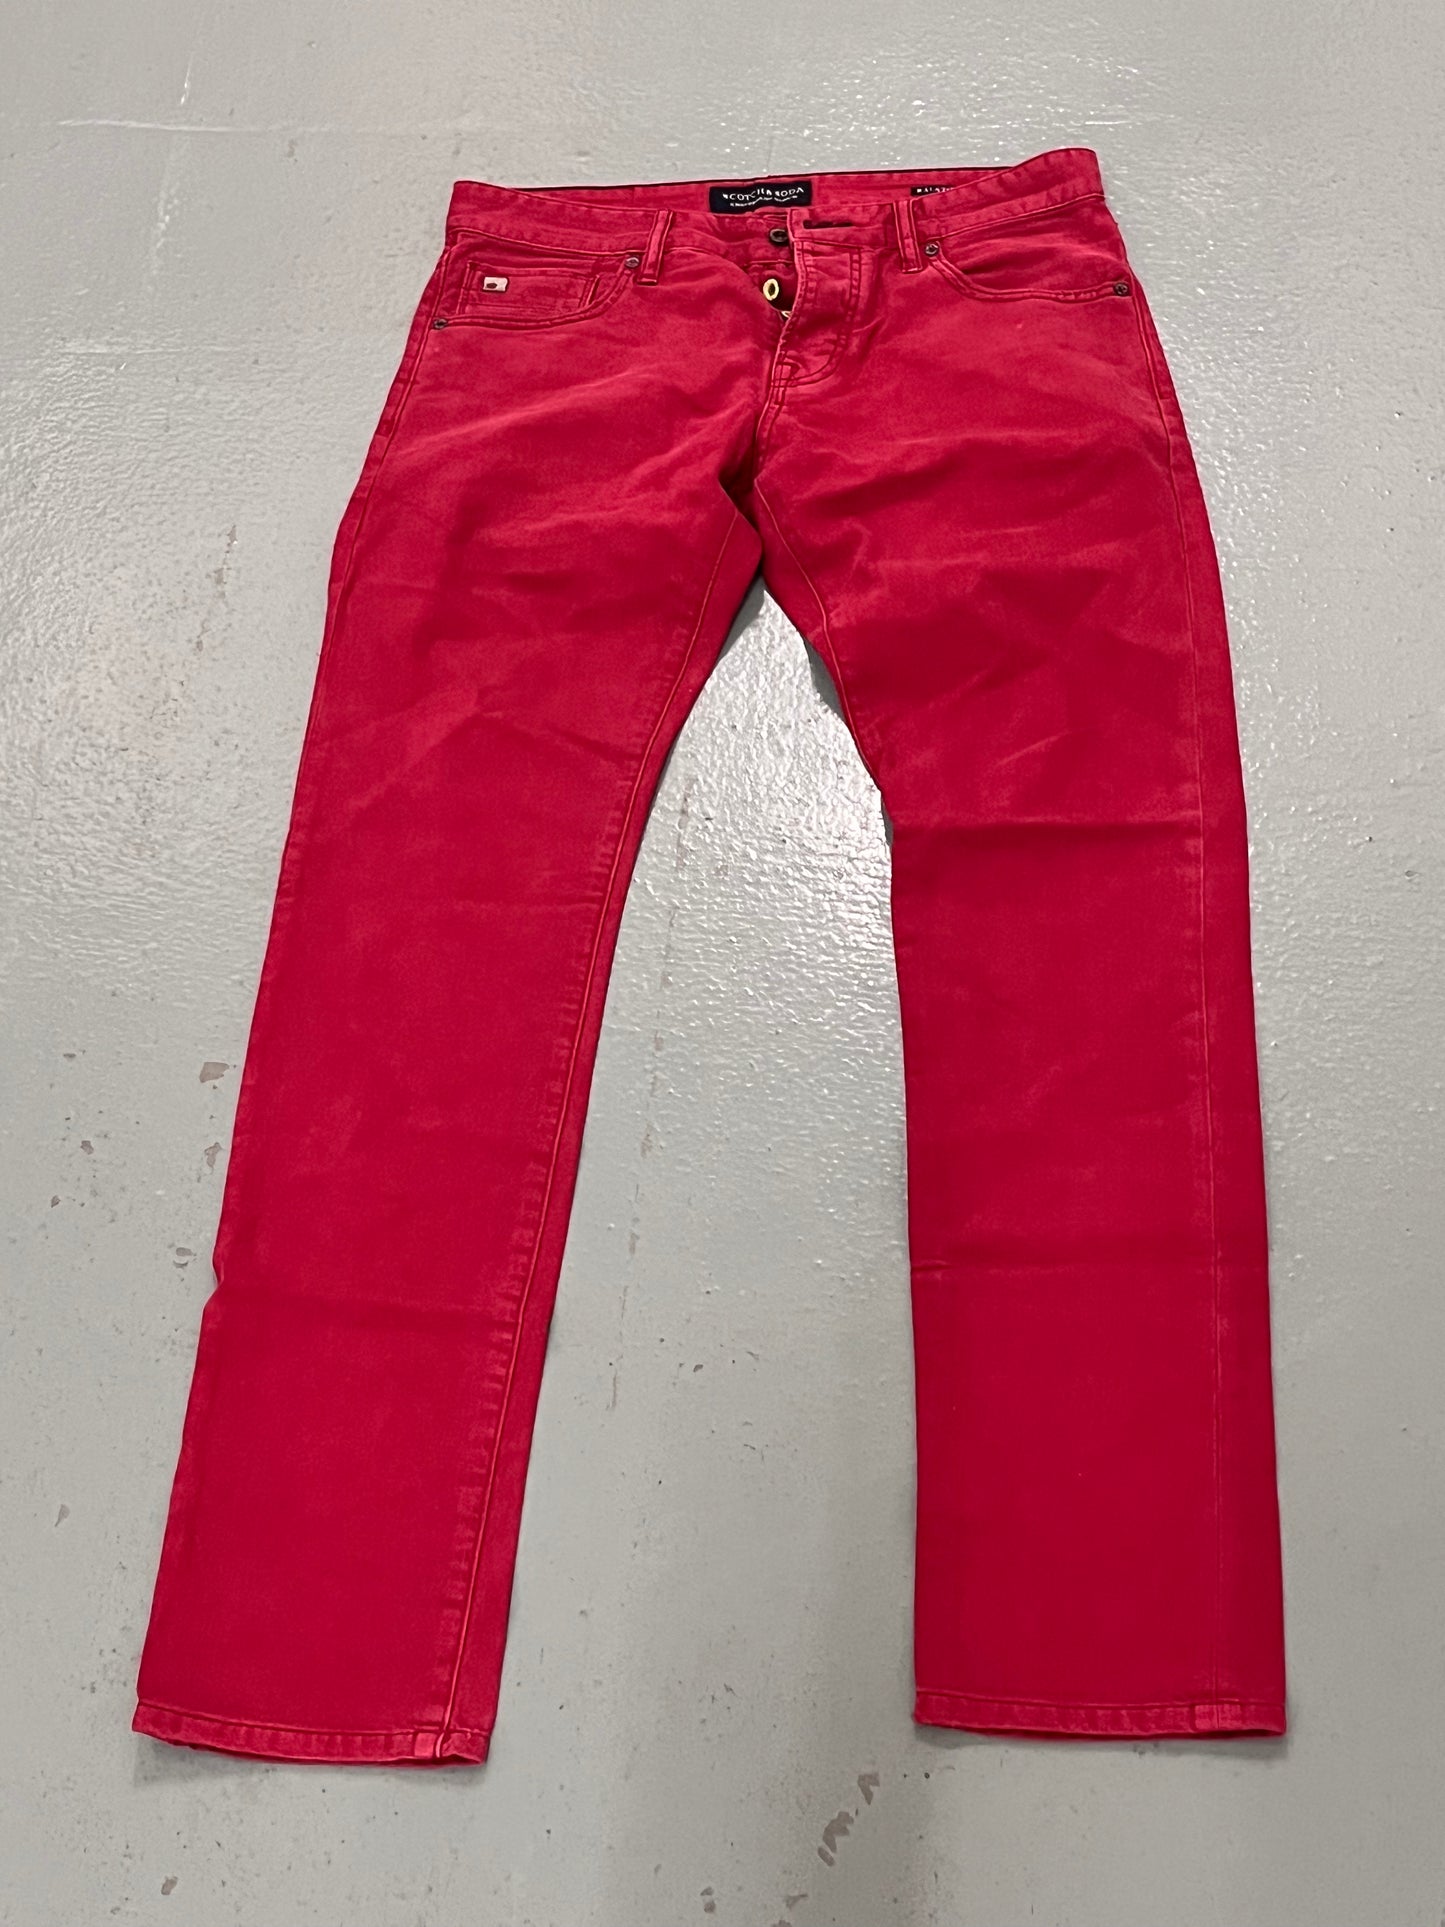 NEW GIRL: Winston Bishop's Scotch and Soda Red Denim Jeans (30)